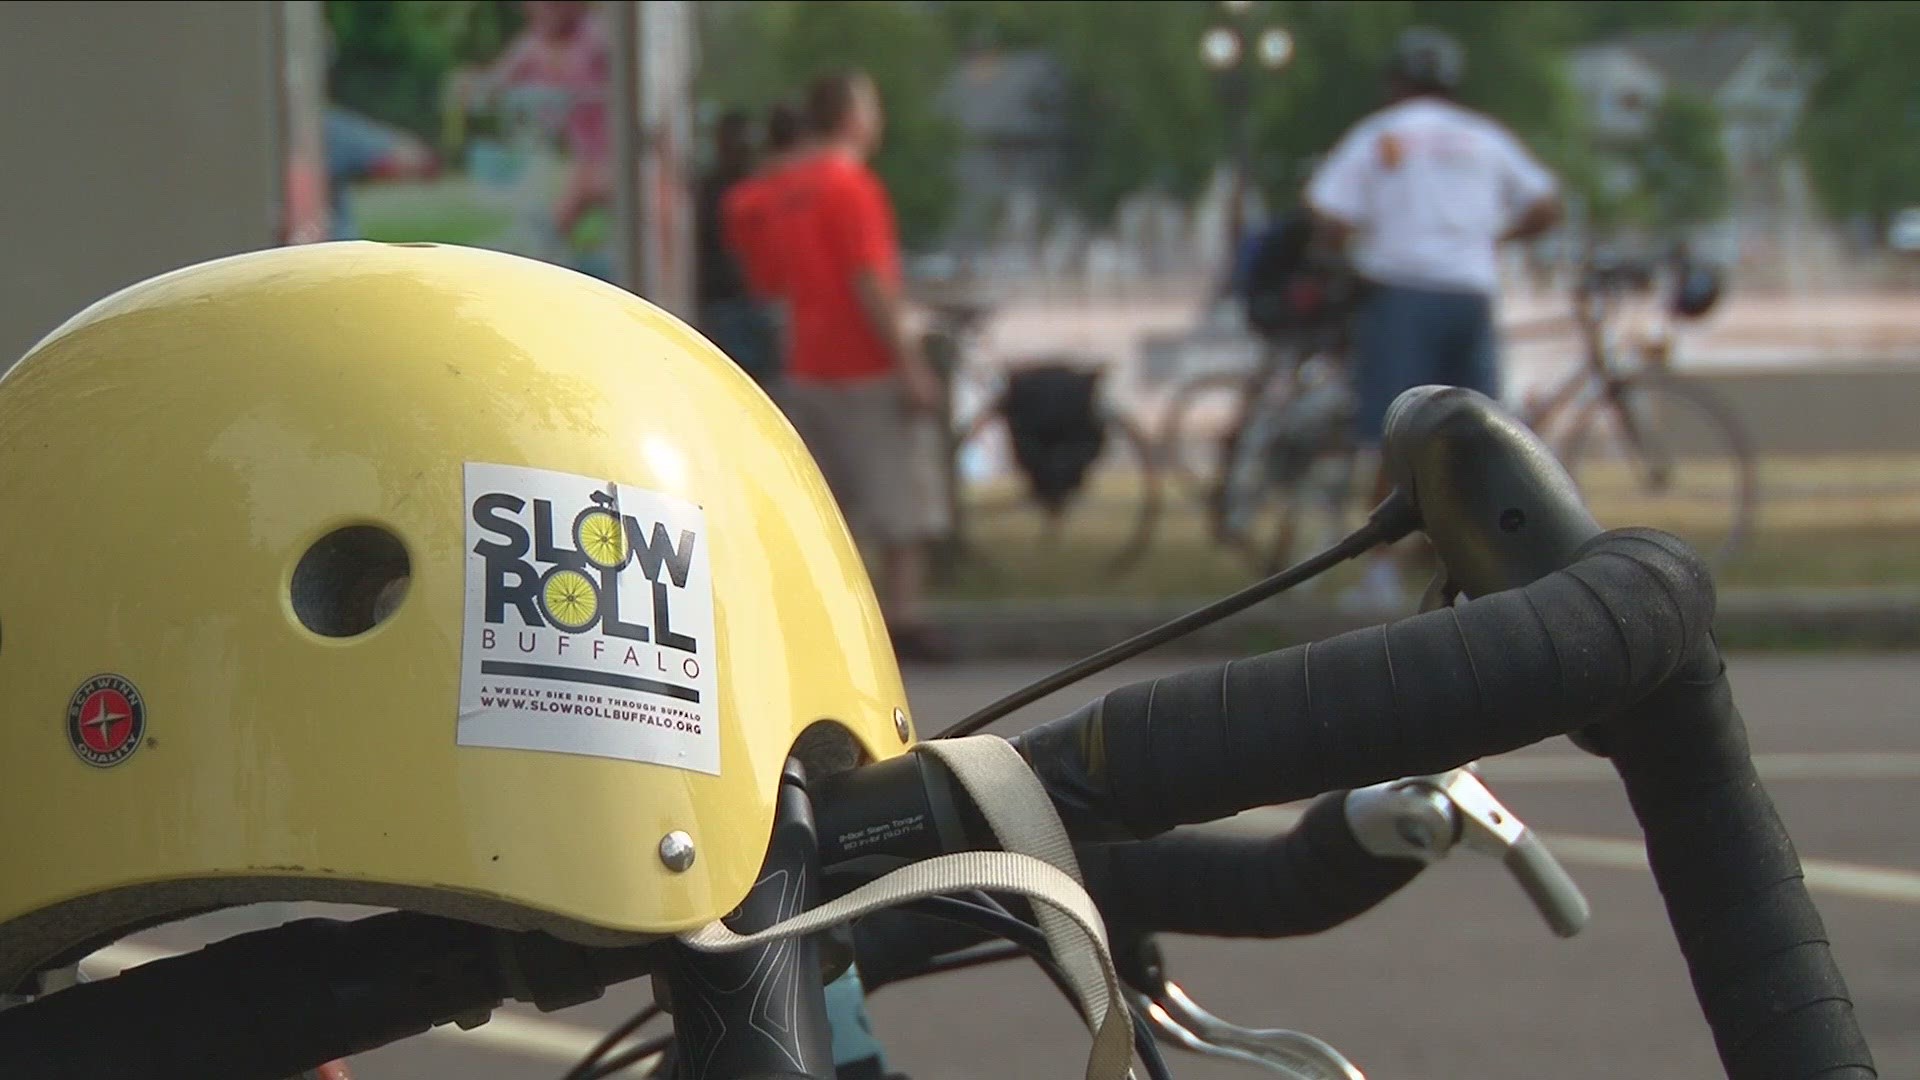 There will be 27 chances to ride with Slow Roll this season. The first ride is Monday, starting at Niagara Square, kicking off at 6:30 p.m.